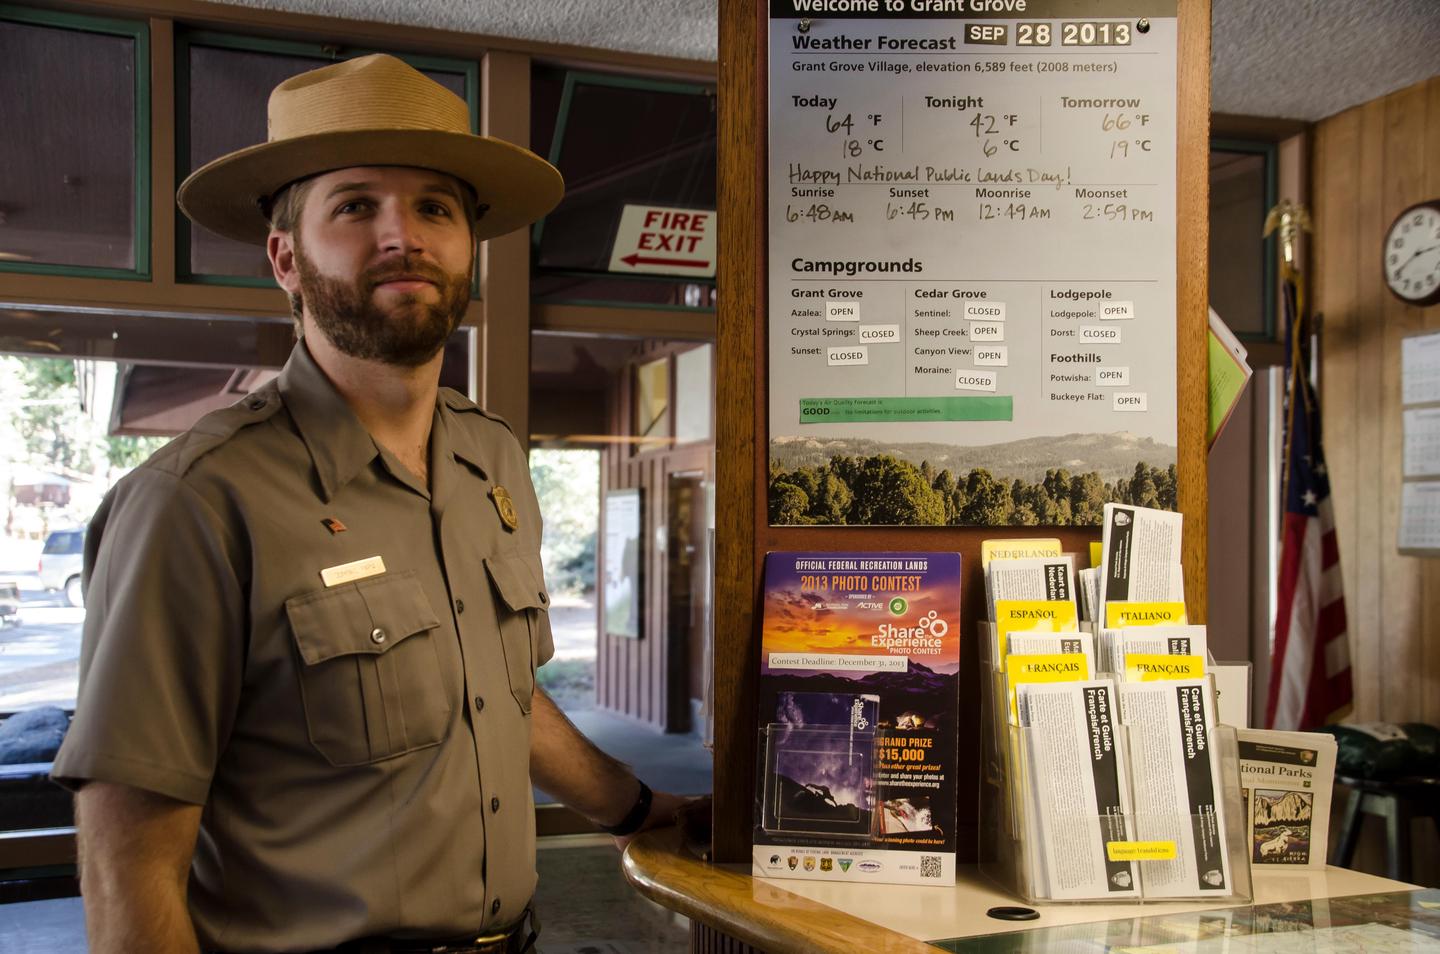 Kings Canyon Visitor CenterHere, you can talk to a ranger and get trip planning information, or obtain a wilderness permit.